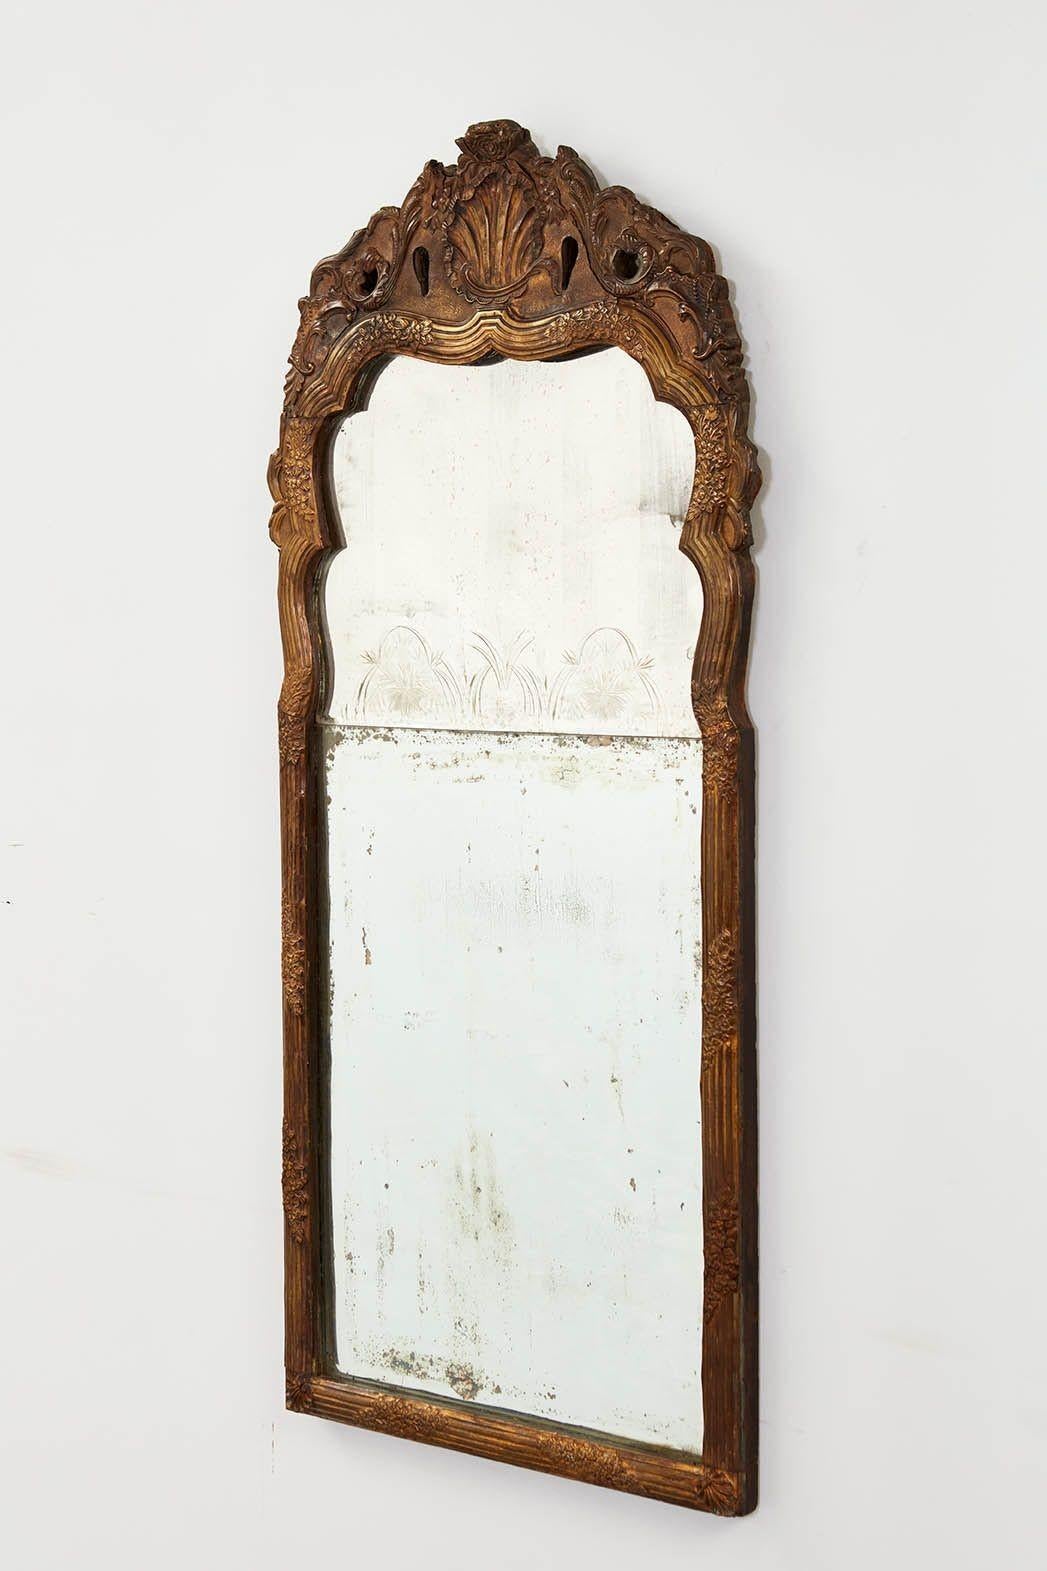 Fine 18th century Danish or Swedish rococo mirror having a shell decorated crest with foliate adorned ribbed frame, the original arched beveled plate with etched decoration, over well oxidized beveled lower plate.